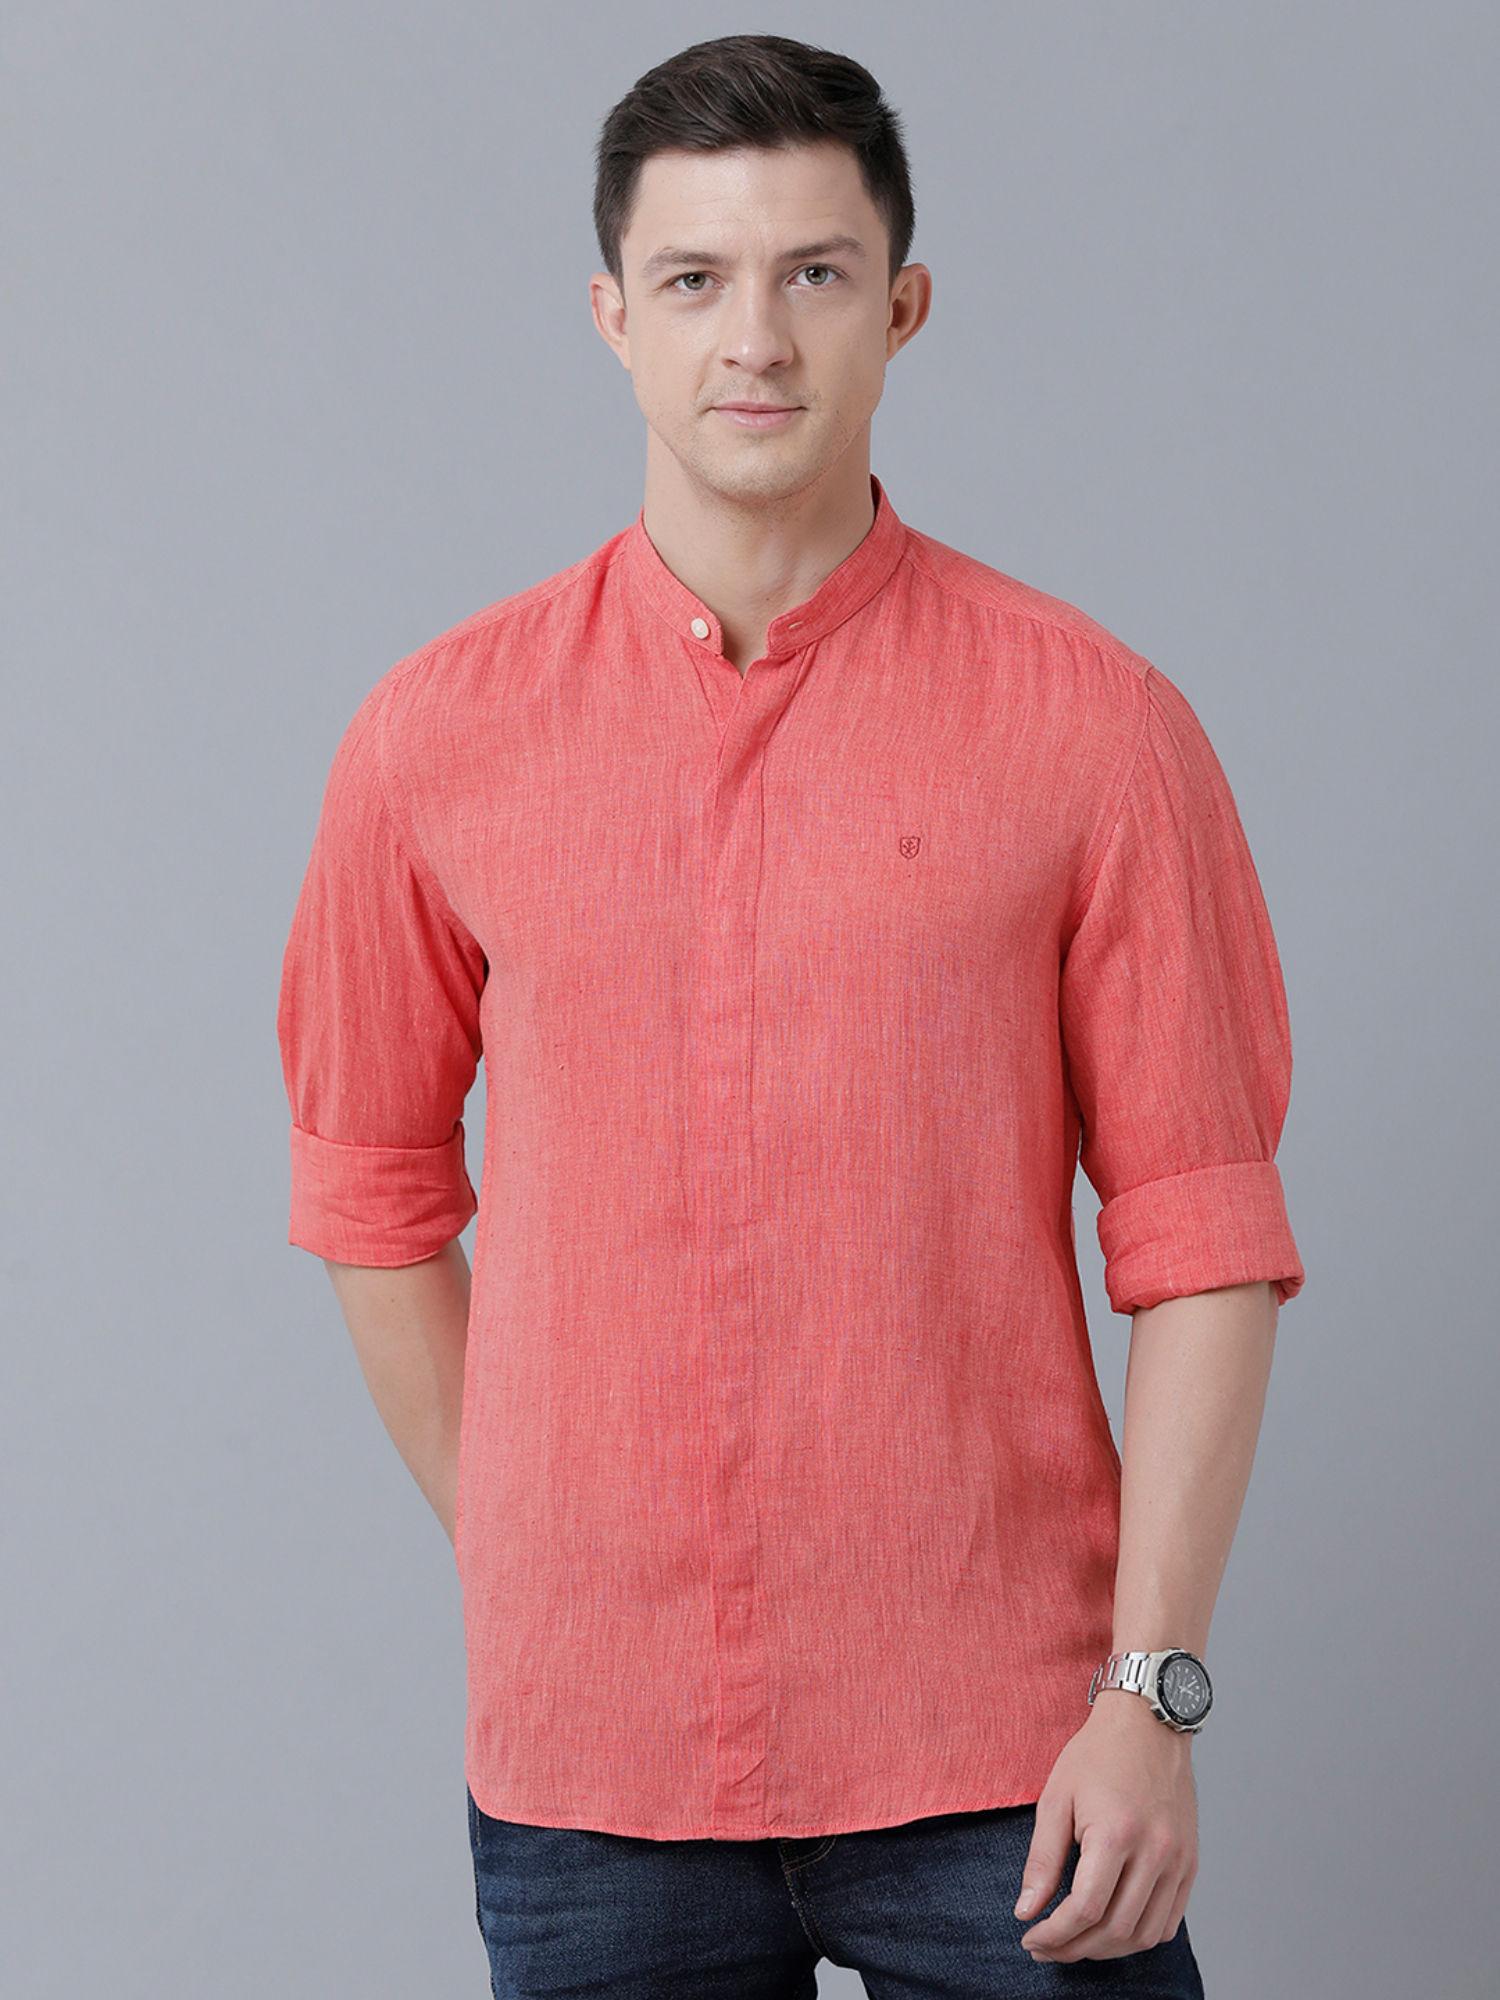 men's pure linen red chambray regular fit full sleeve casual shirt